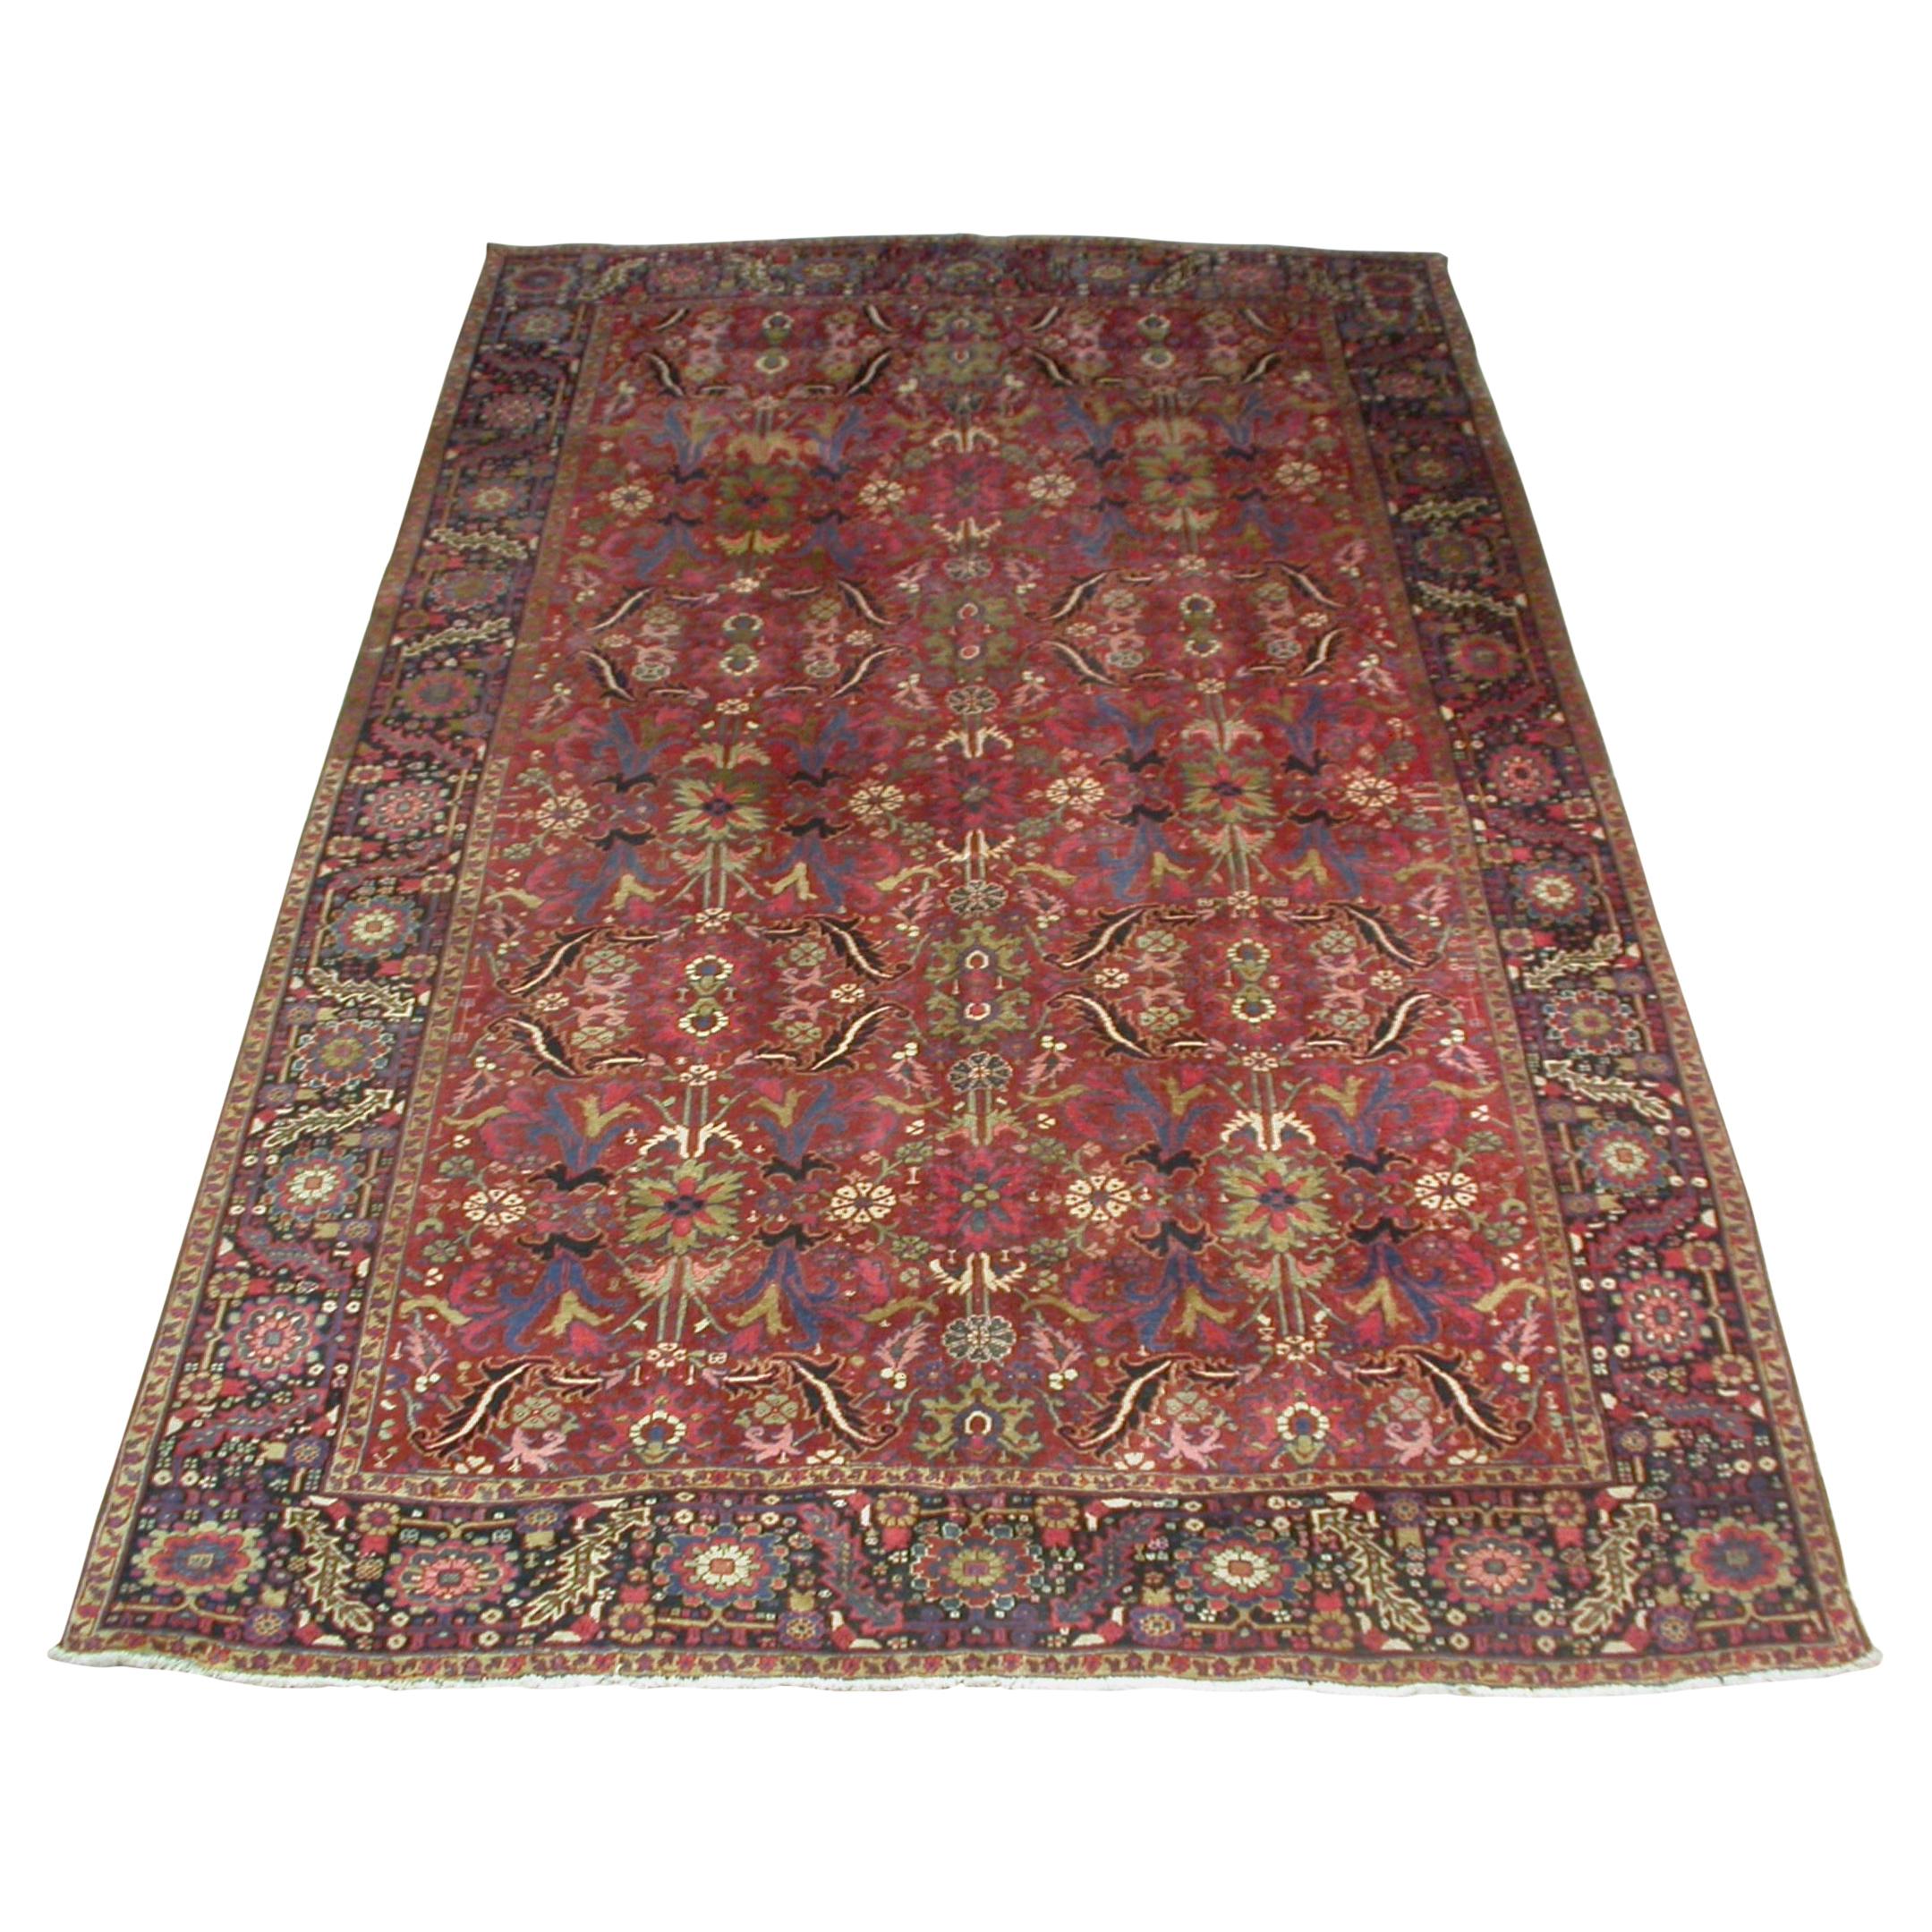 Antique Red Navy Blue Green Geometric Tribal Persian Heriz Rug, circa 1930s For Sale